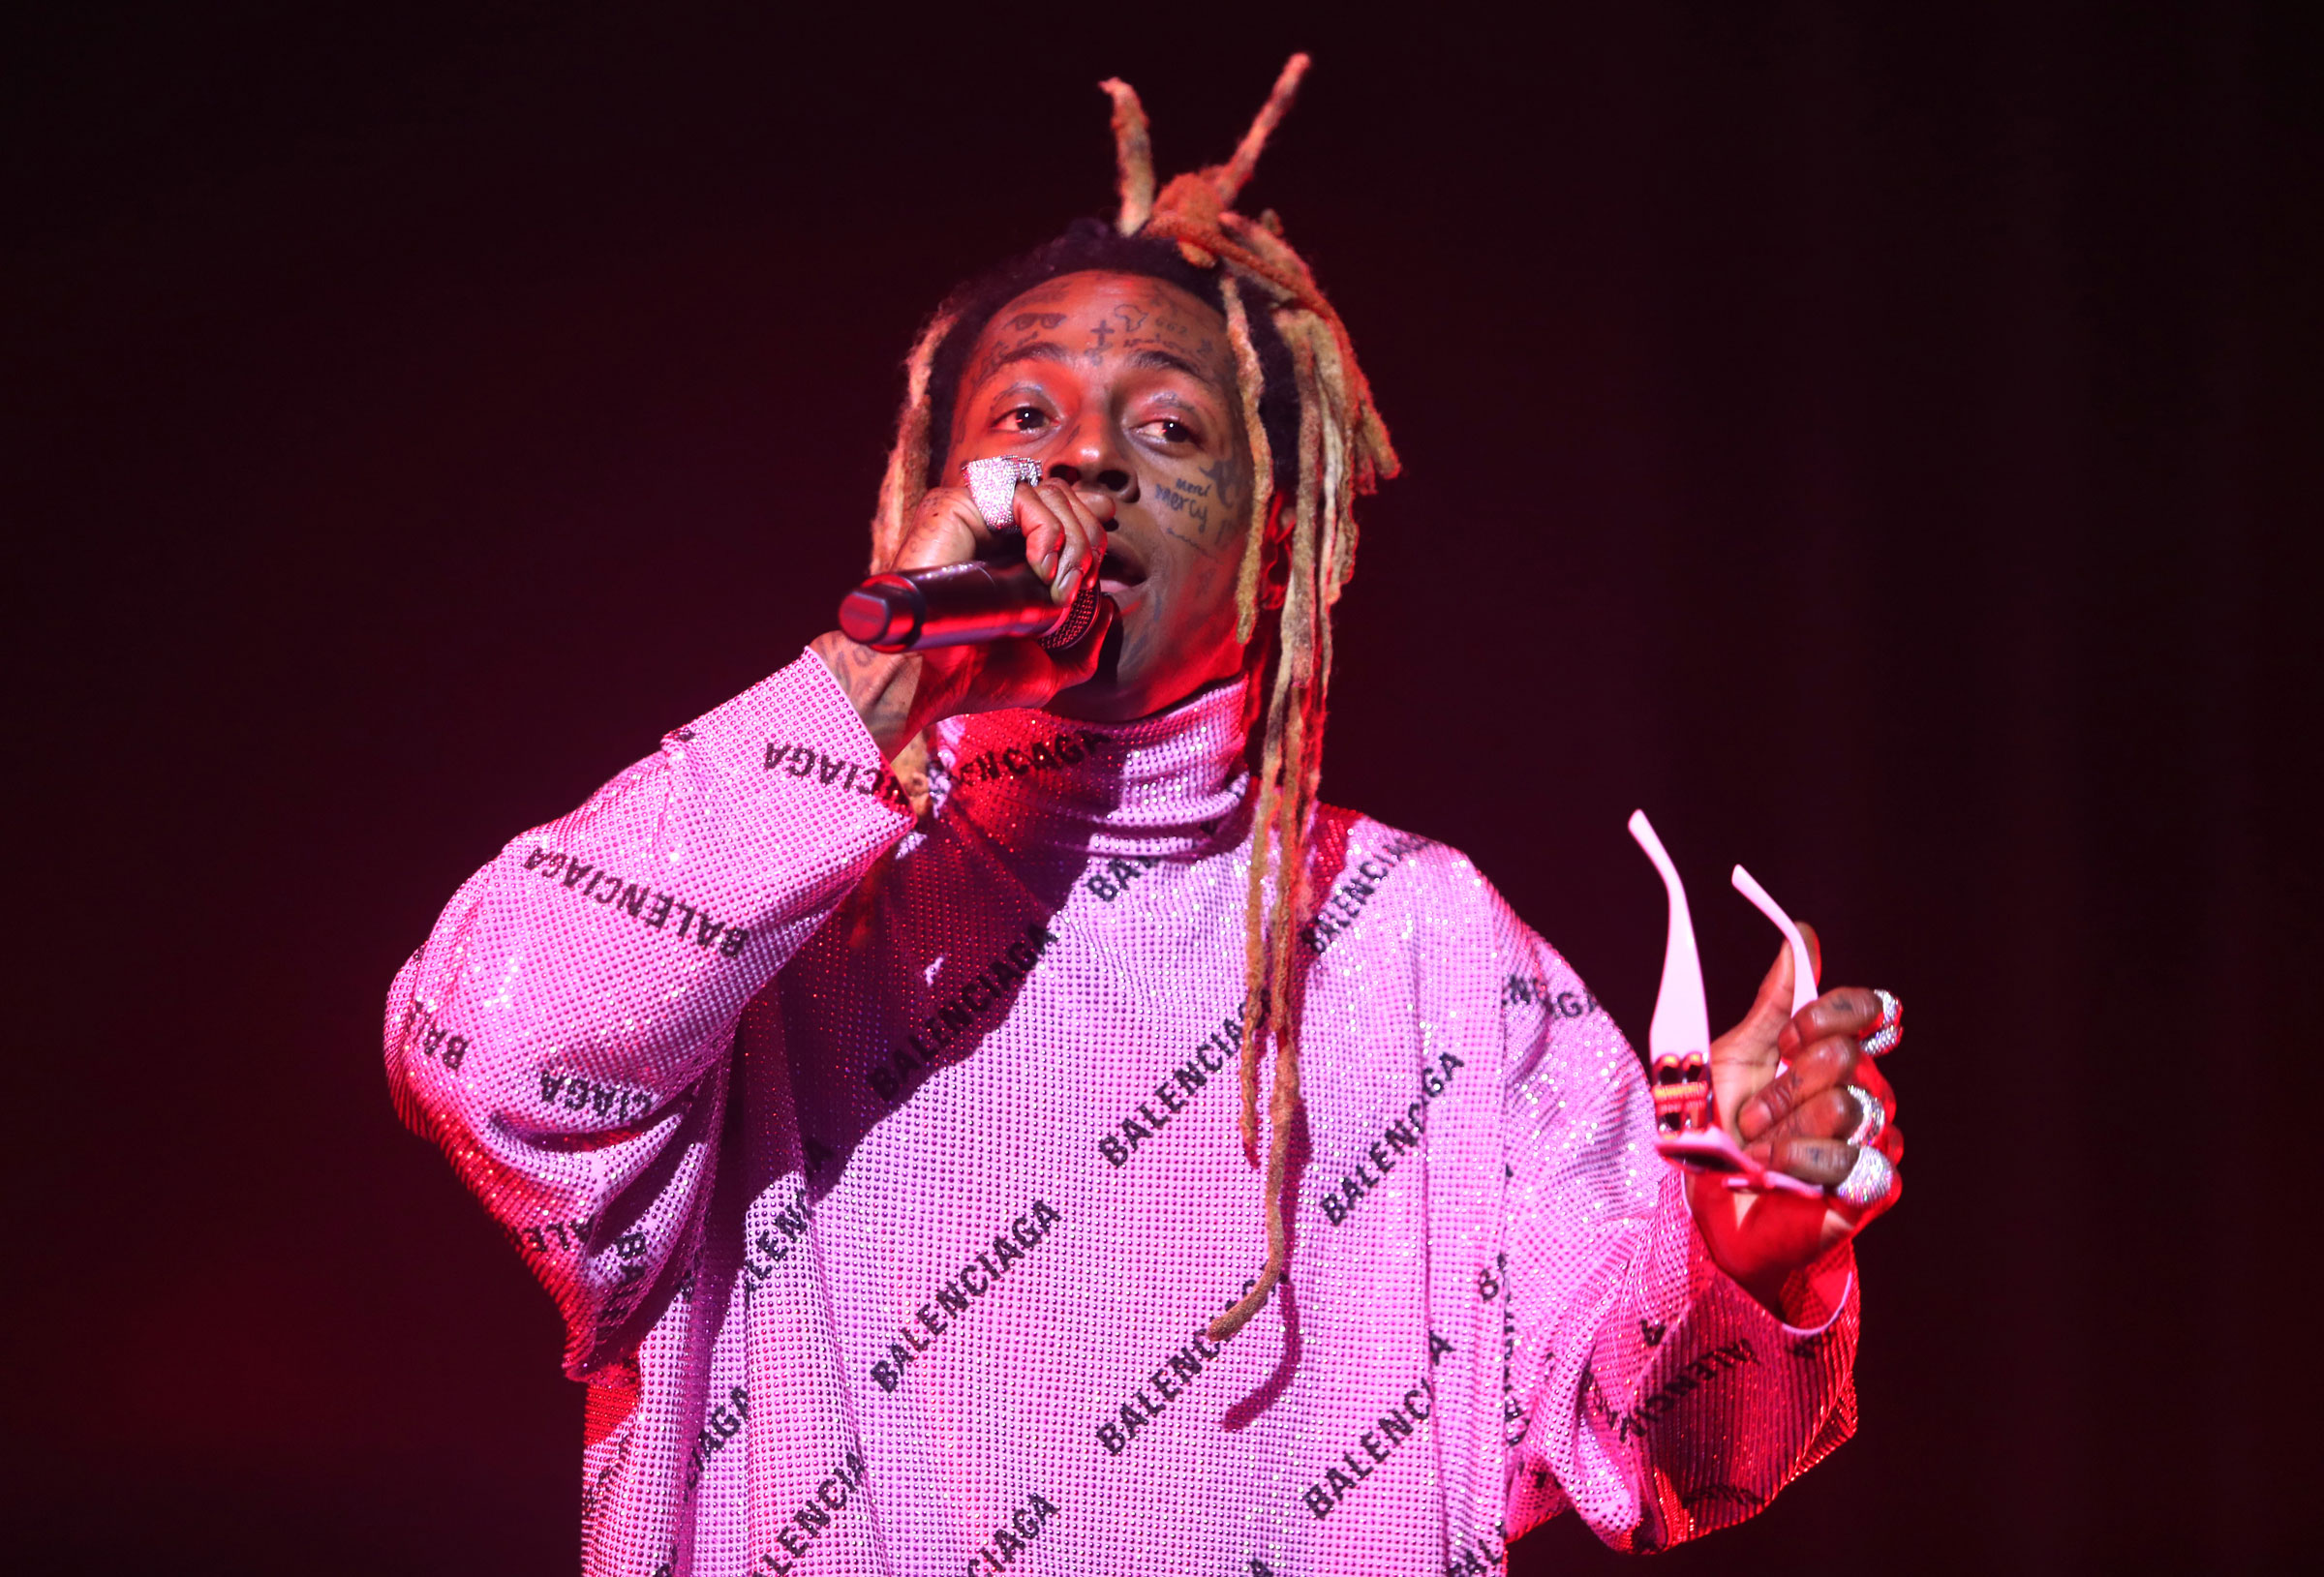 LOS ANGELES, CALIFORNIA - NOVEMBER 17: Lil Wayne performs at the Amazon Music Live Concert Series on November 17, 2022 in Los Angeles, California. (Photo by Jerritt Clark/Getty Images for Amazon Music) (Getty Images for Amazon Music—2022 Jerritt Clark)